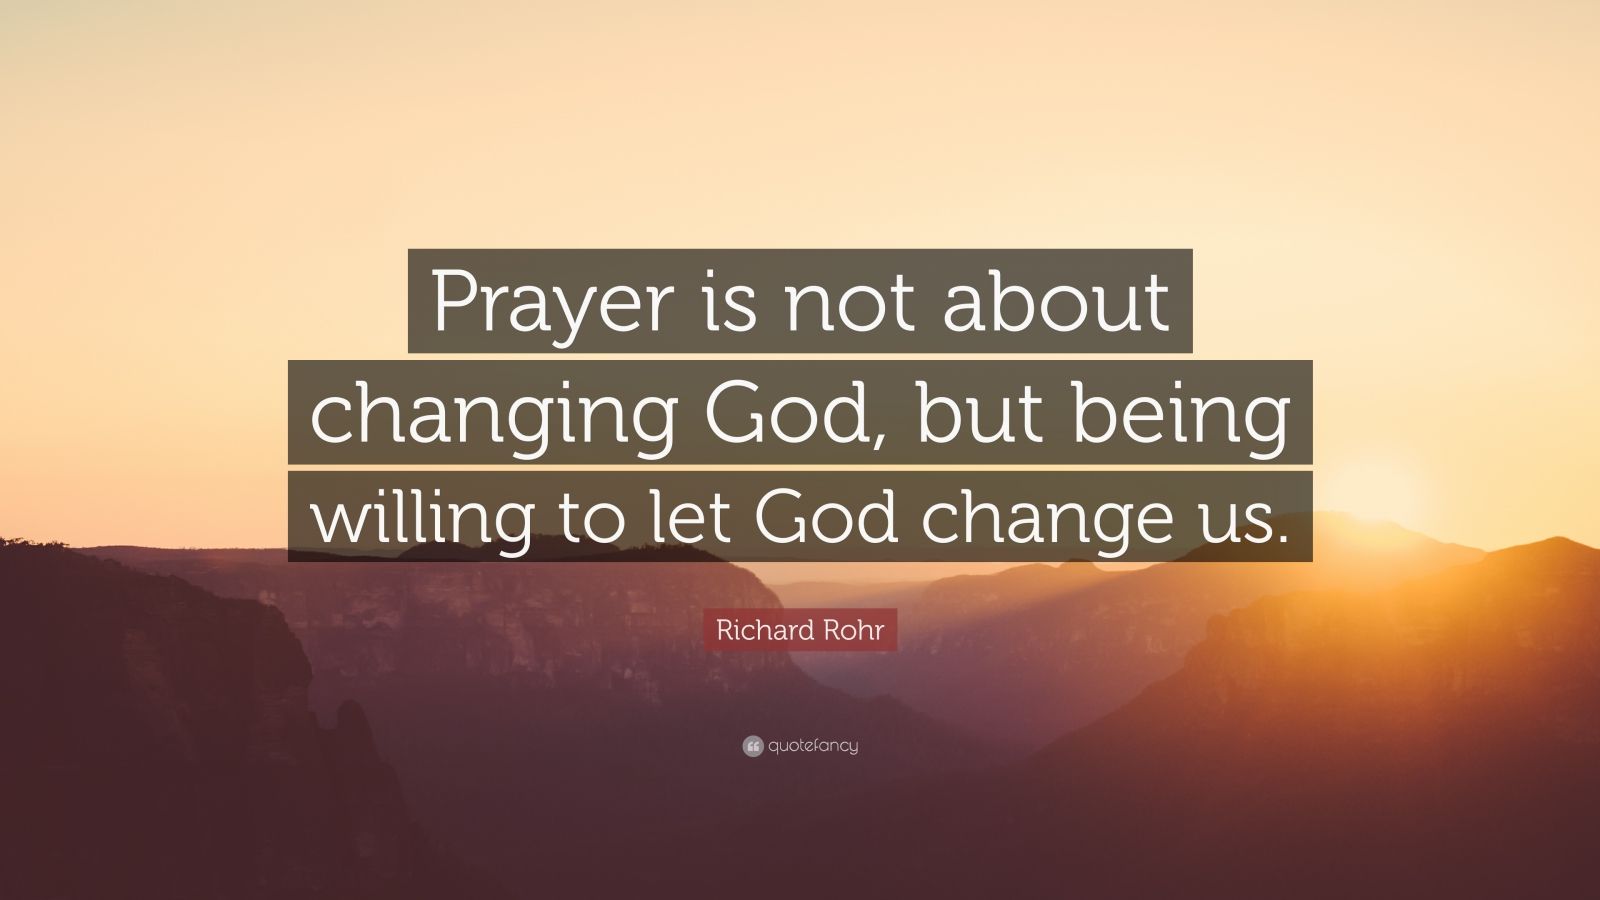 Richard Rohr Quote: “Prayer is not about changing God, but being ...